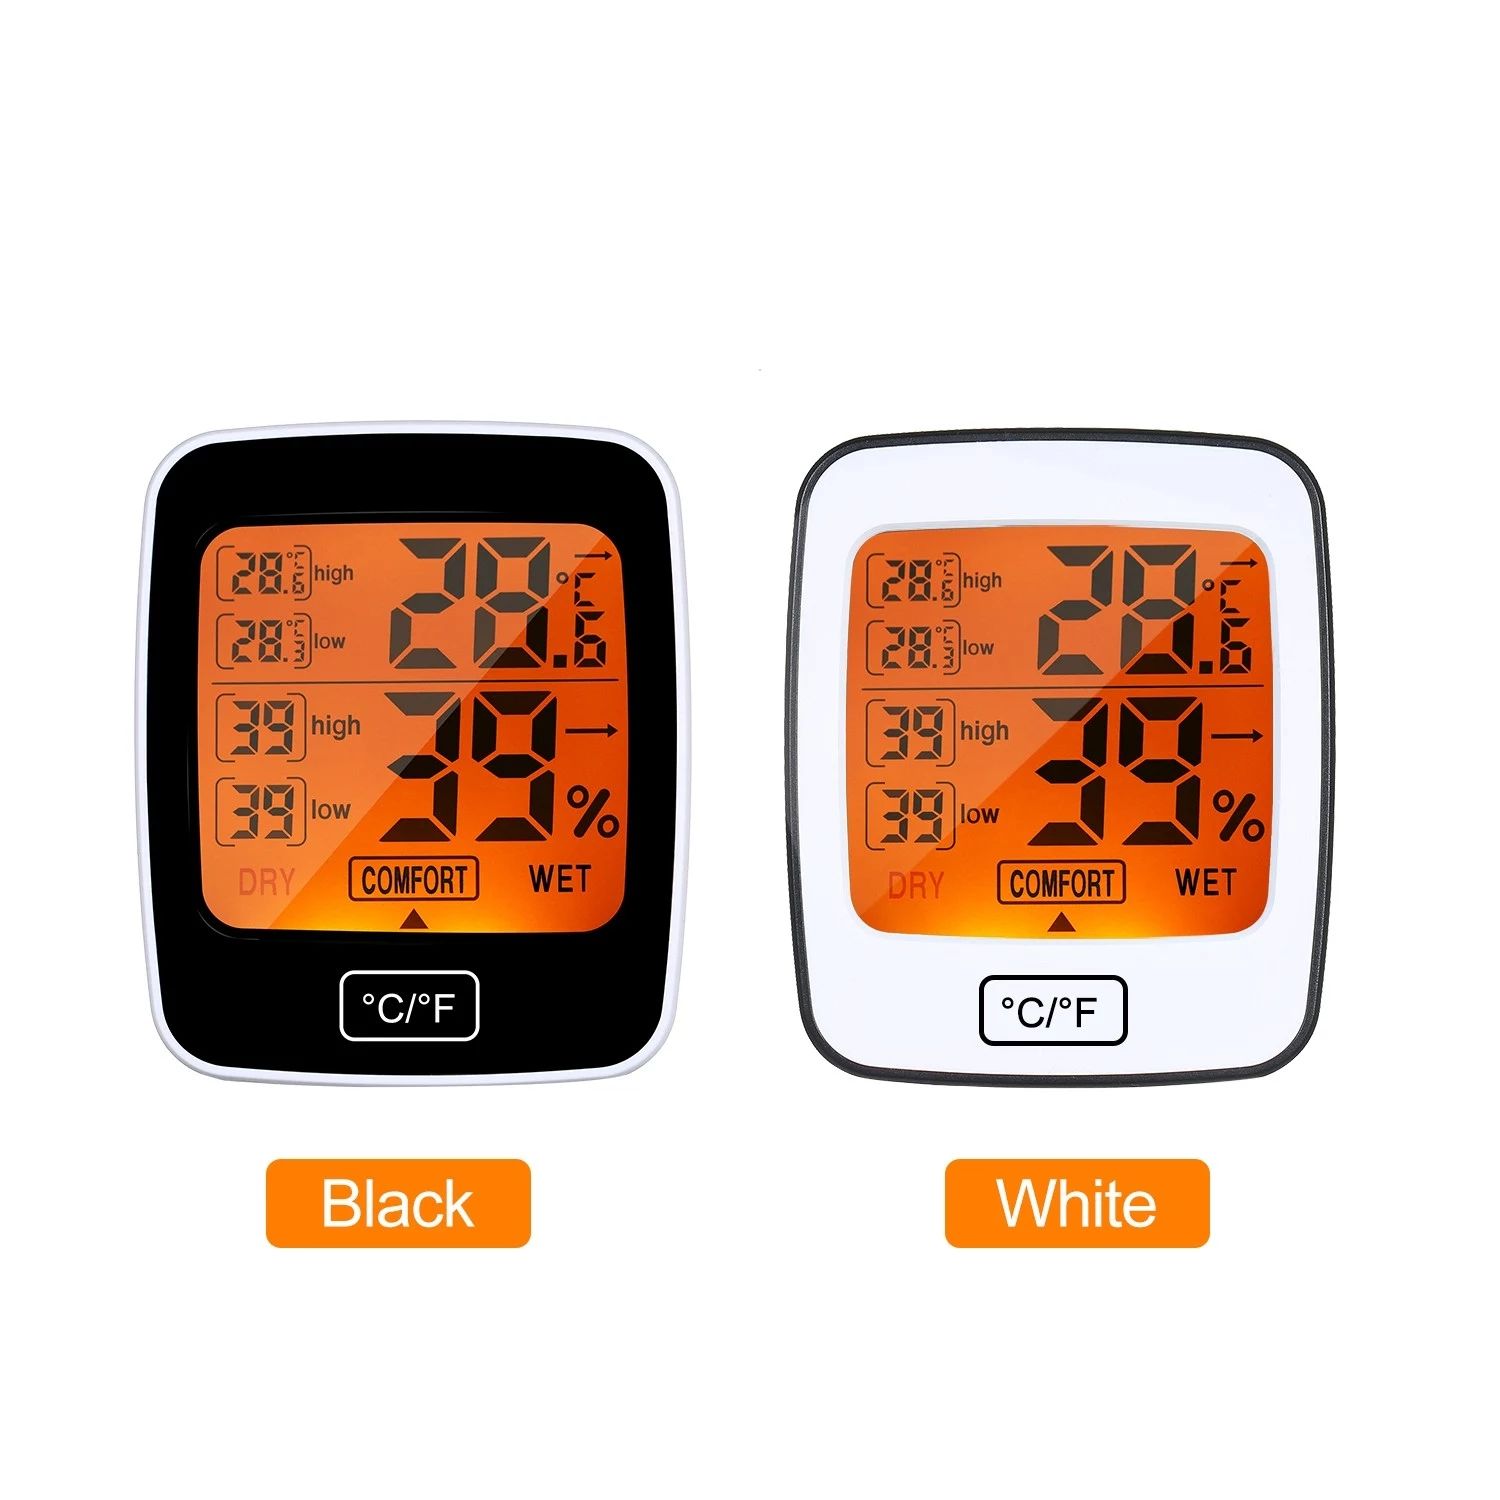 Digital-Temperature-Humidity-Meter-Thermo-hygrometer-degCdegF-Thermometer-Hygrometer-1616471